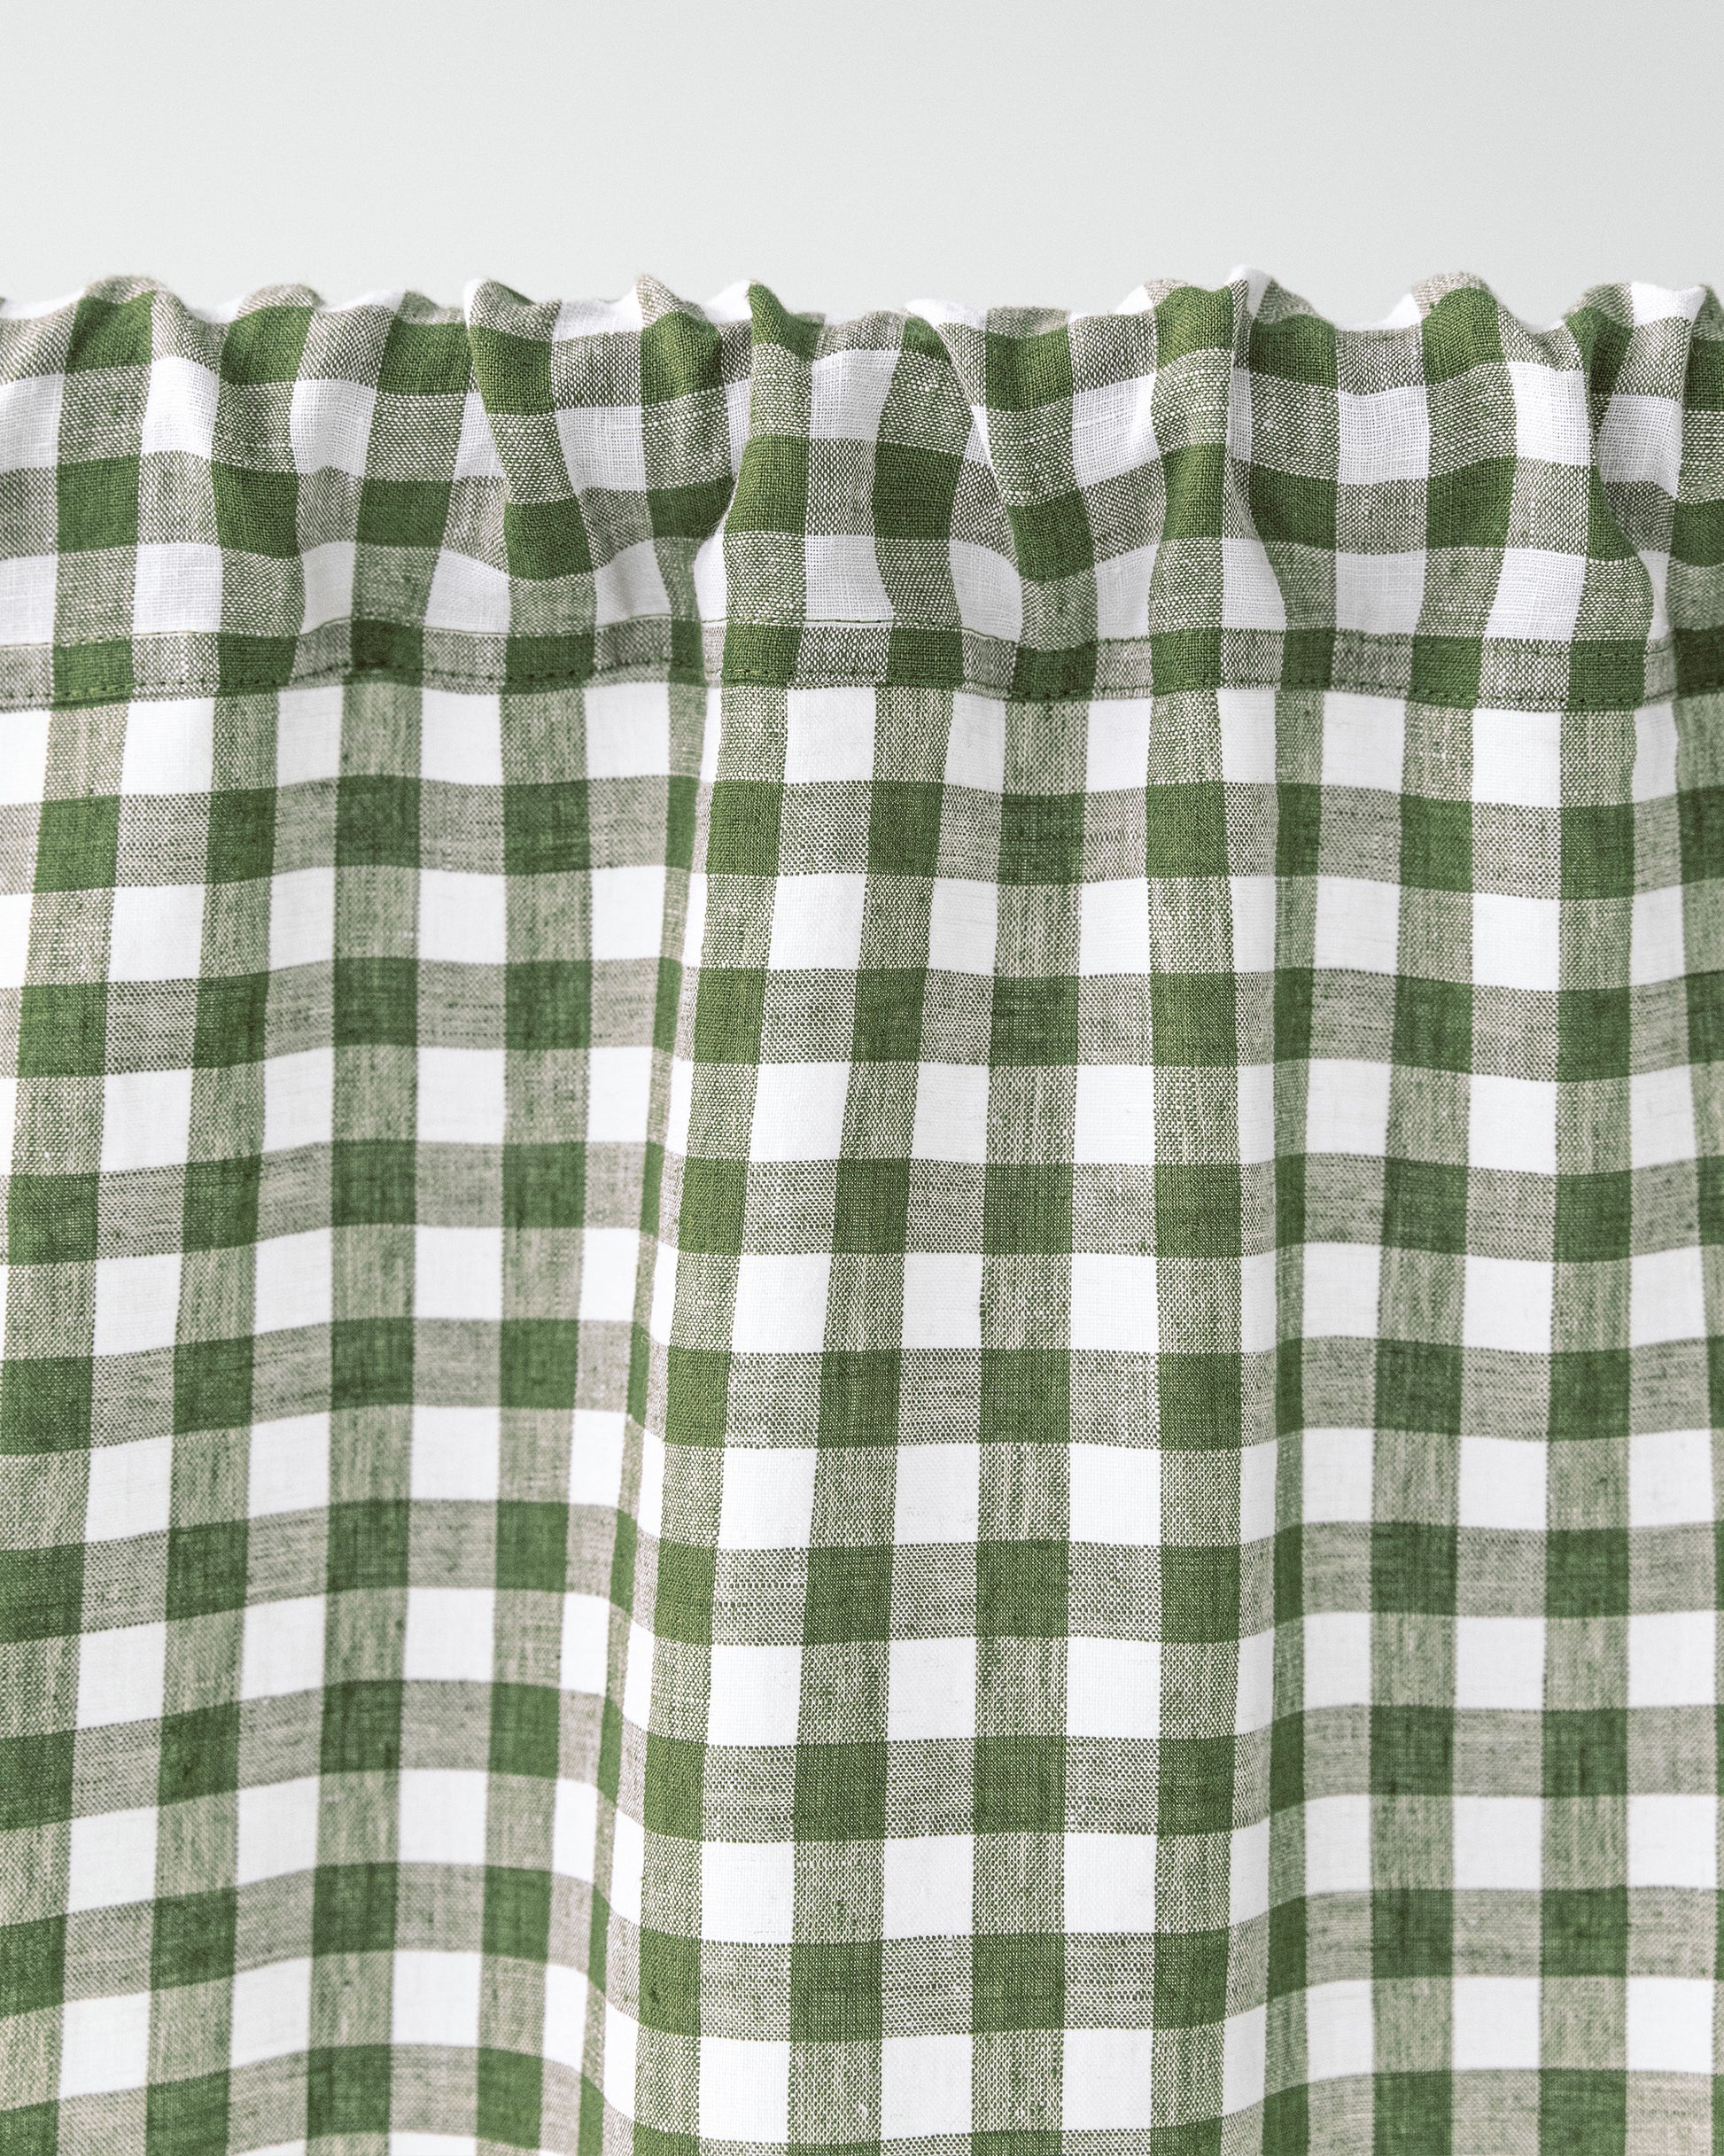 Rod pocket linen curtain panel (1 pcs) in Forest green gingham - MagicLinen